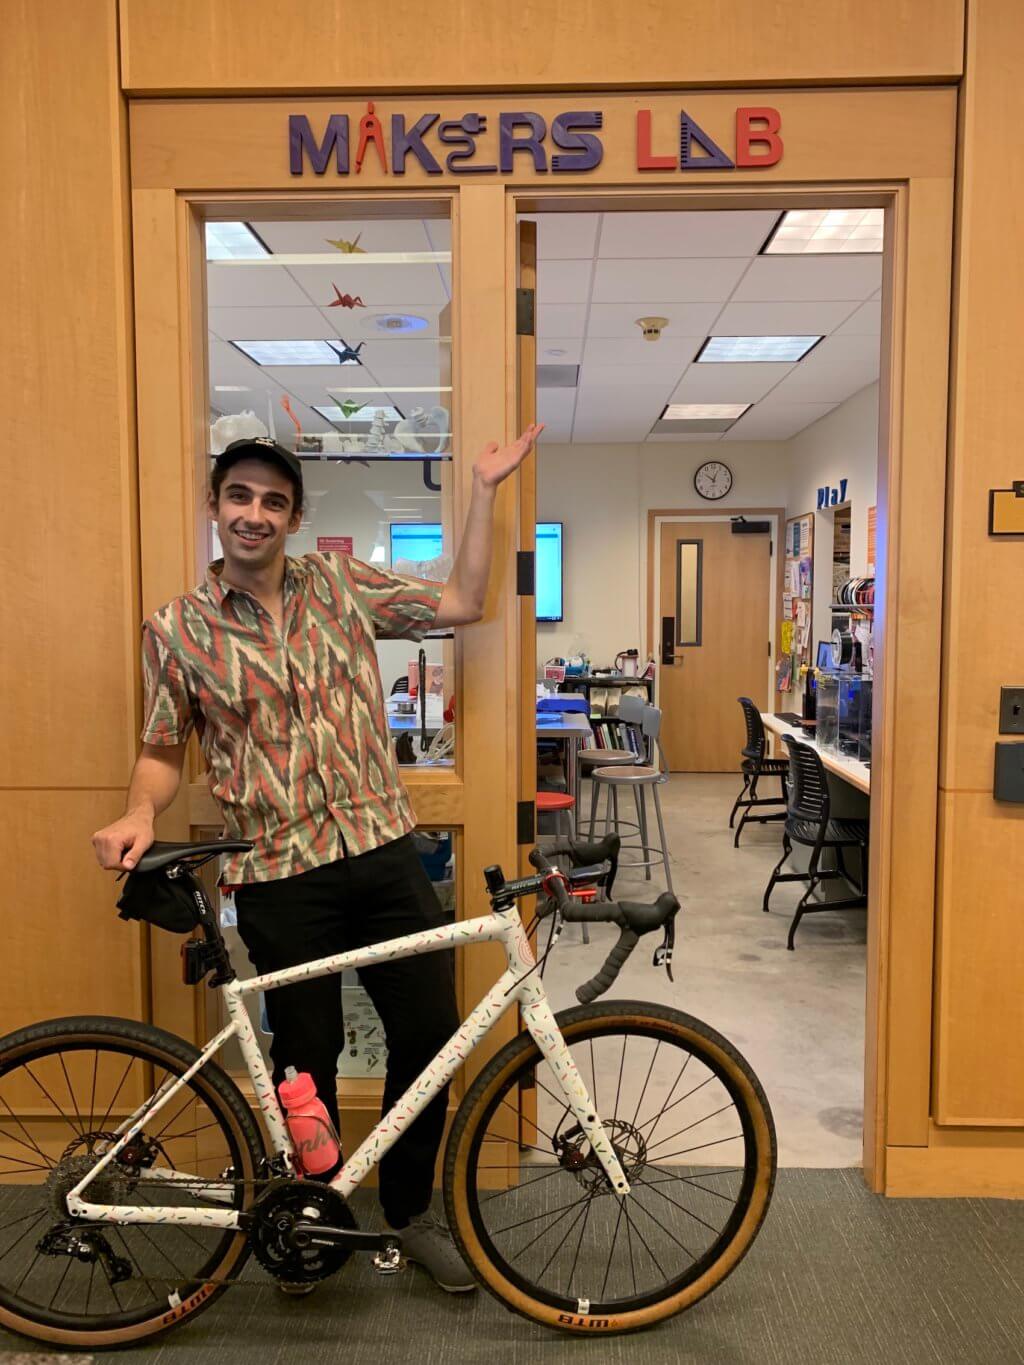 Angelo with bike outside of Makers Lab